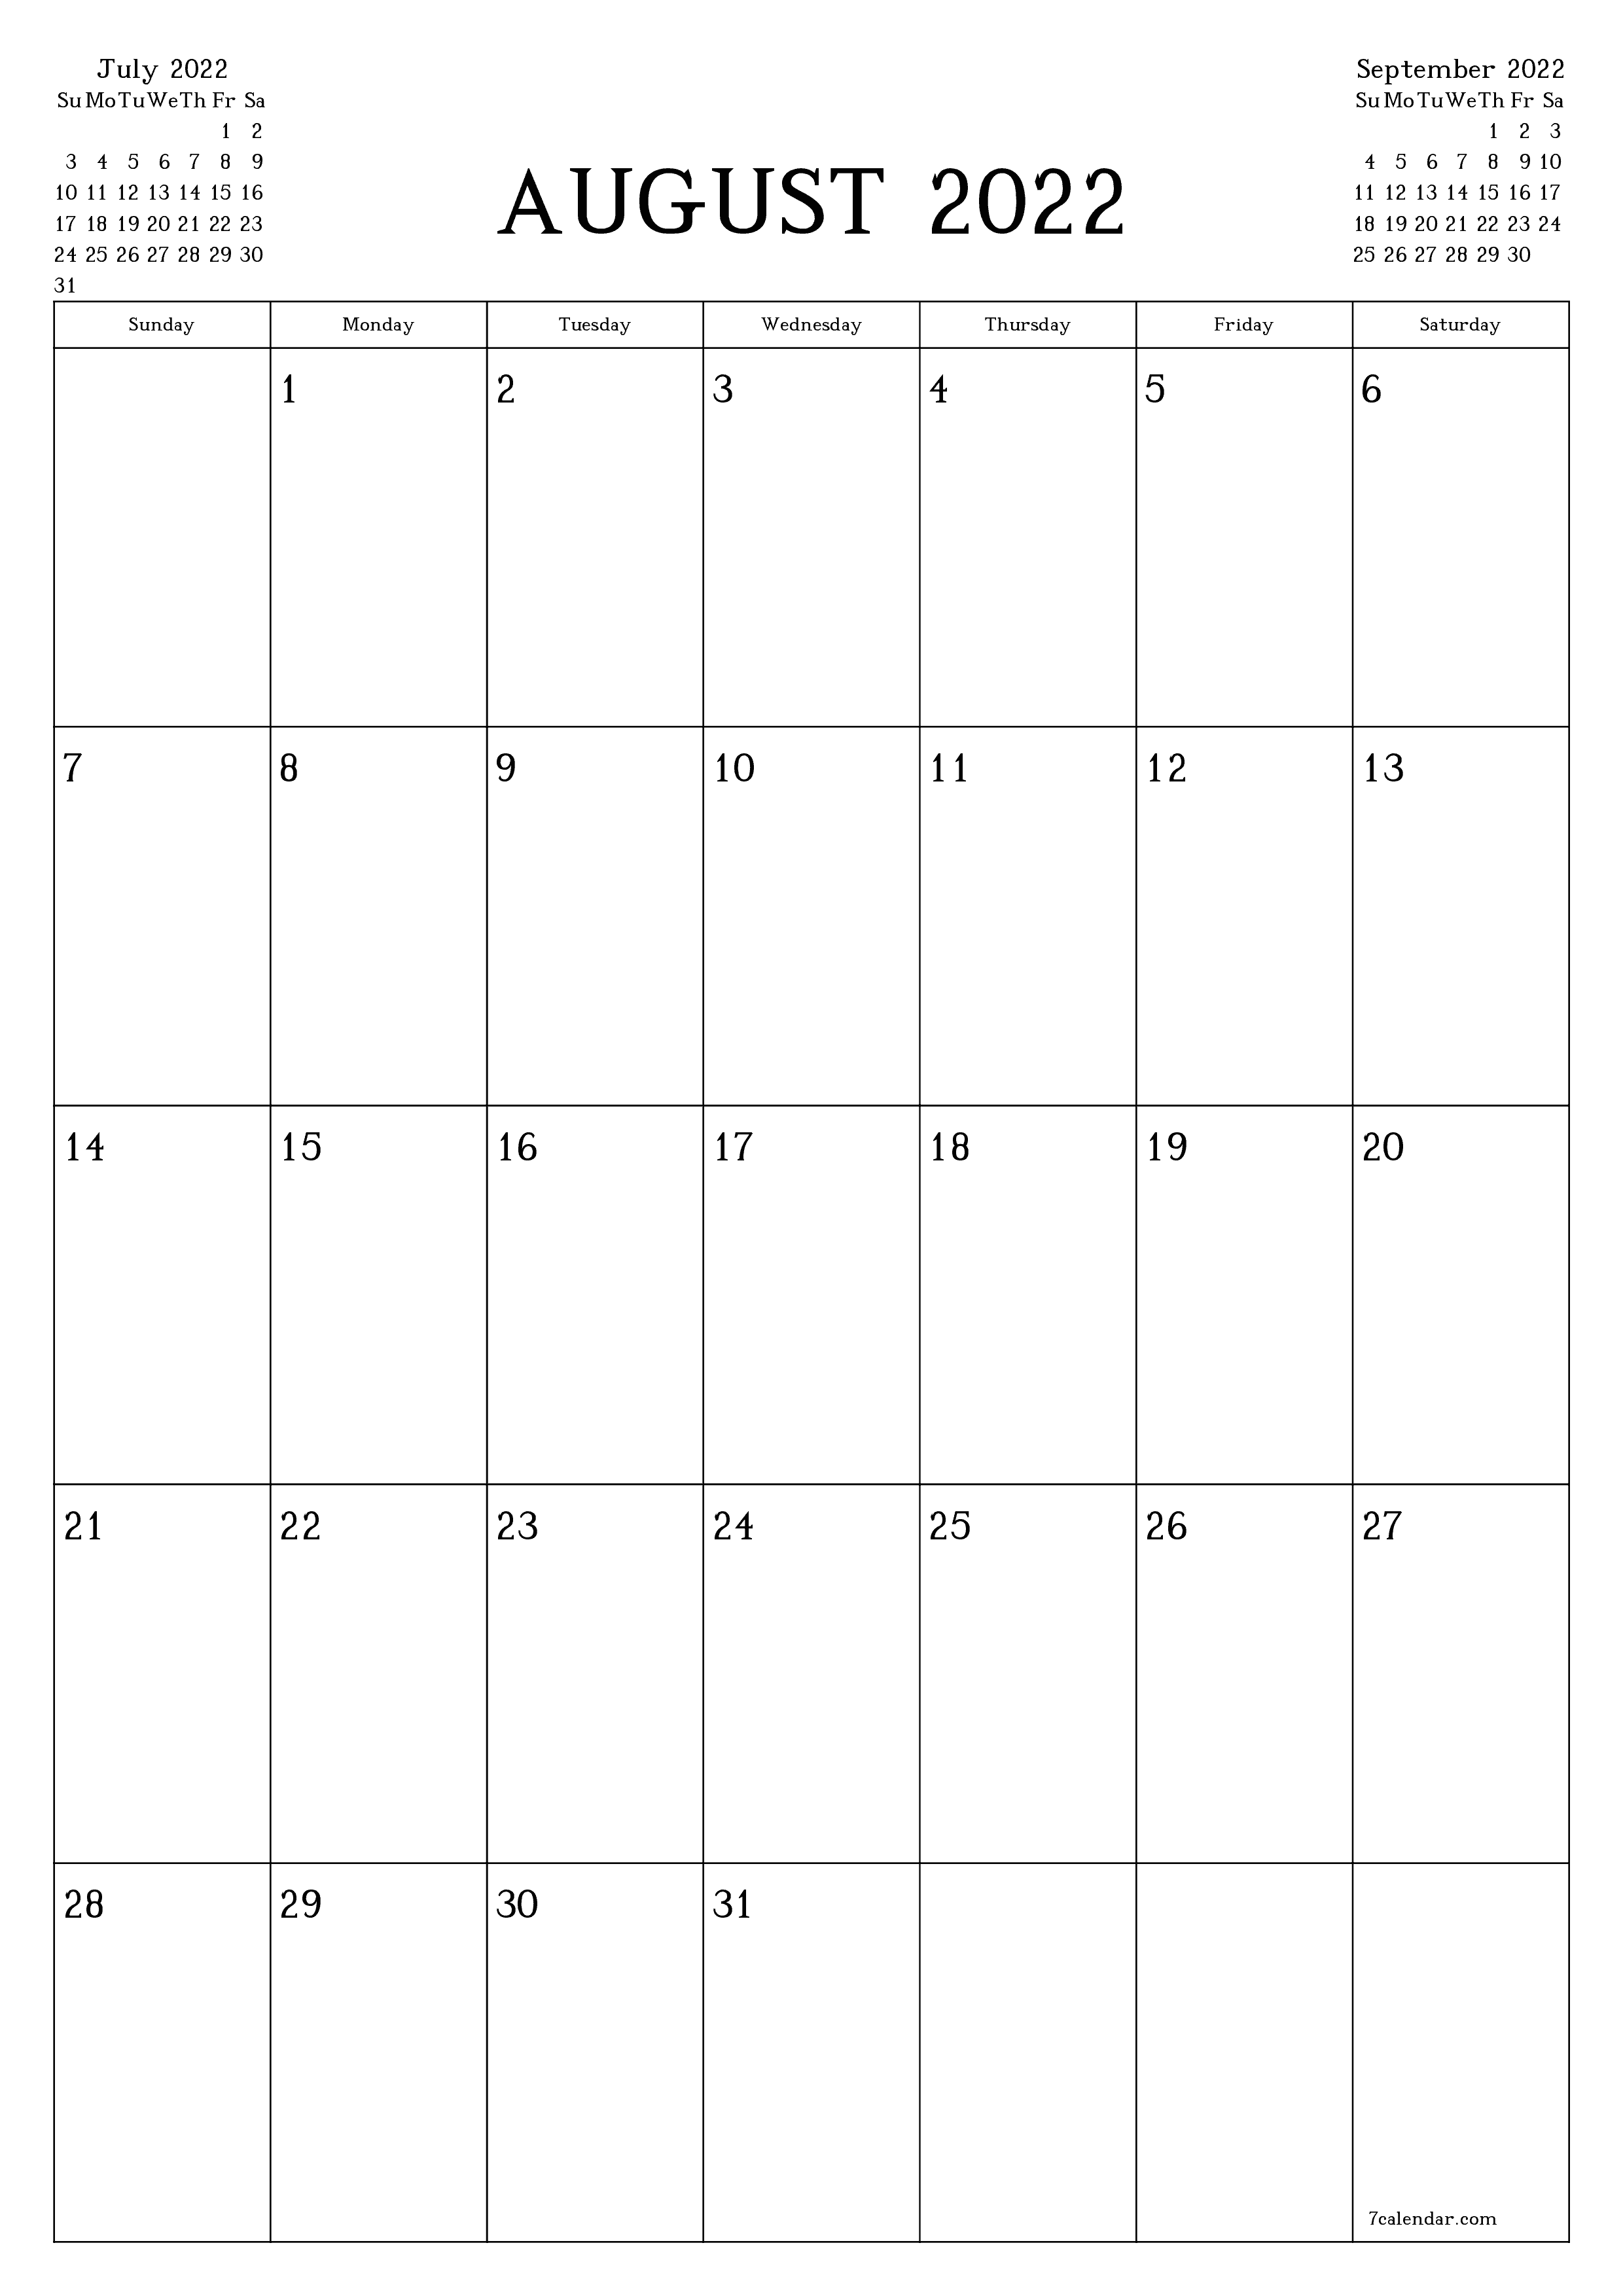 Blank monthly printable calendar and planner for month August 2022 with notes save and print to PDF PNG English - 7calendar.com